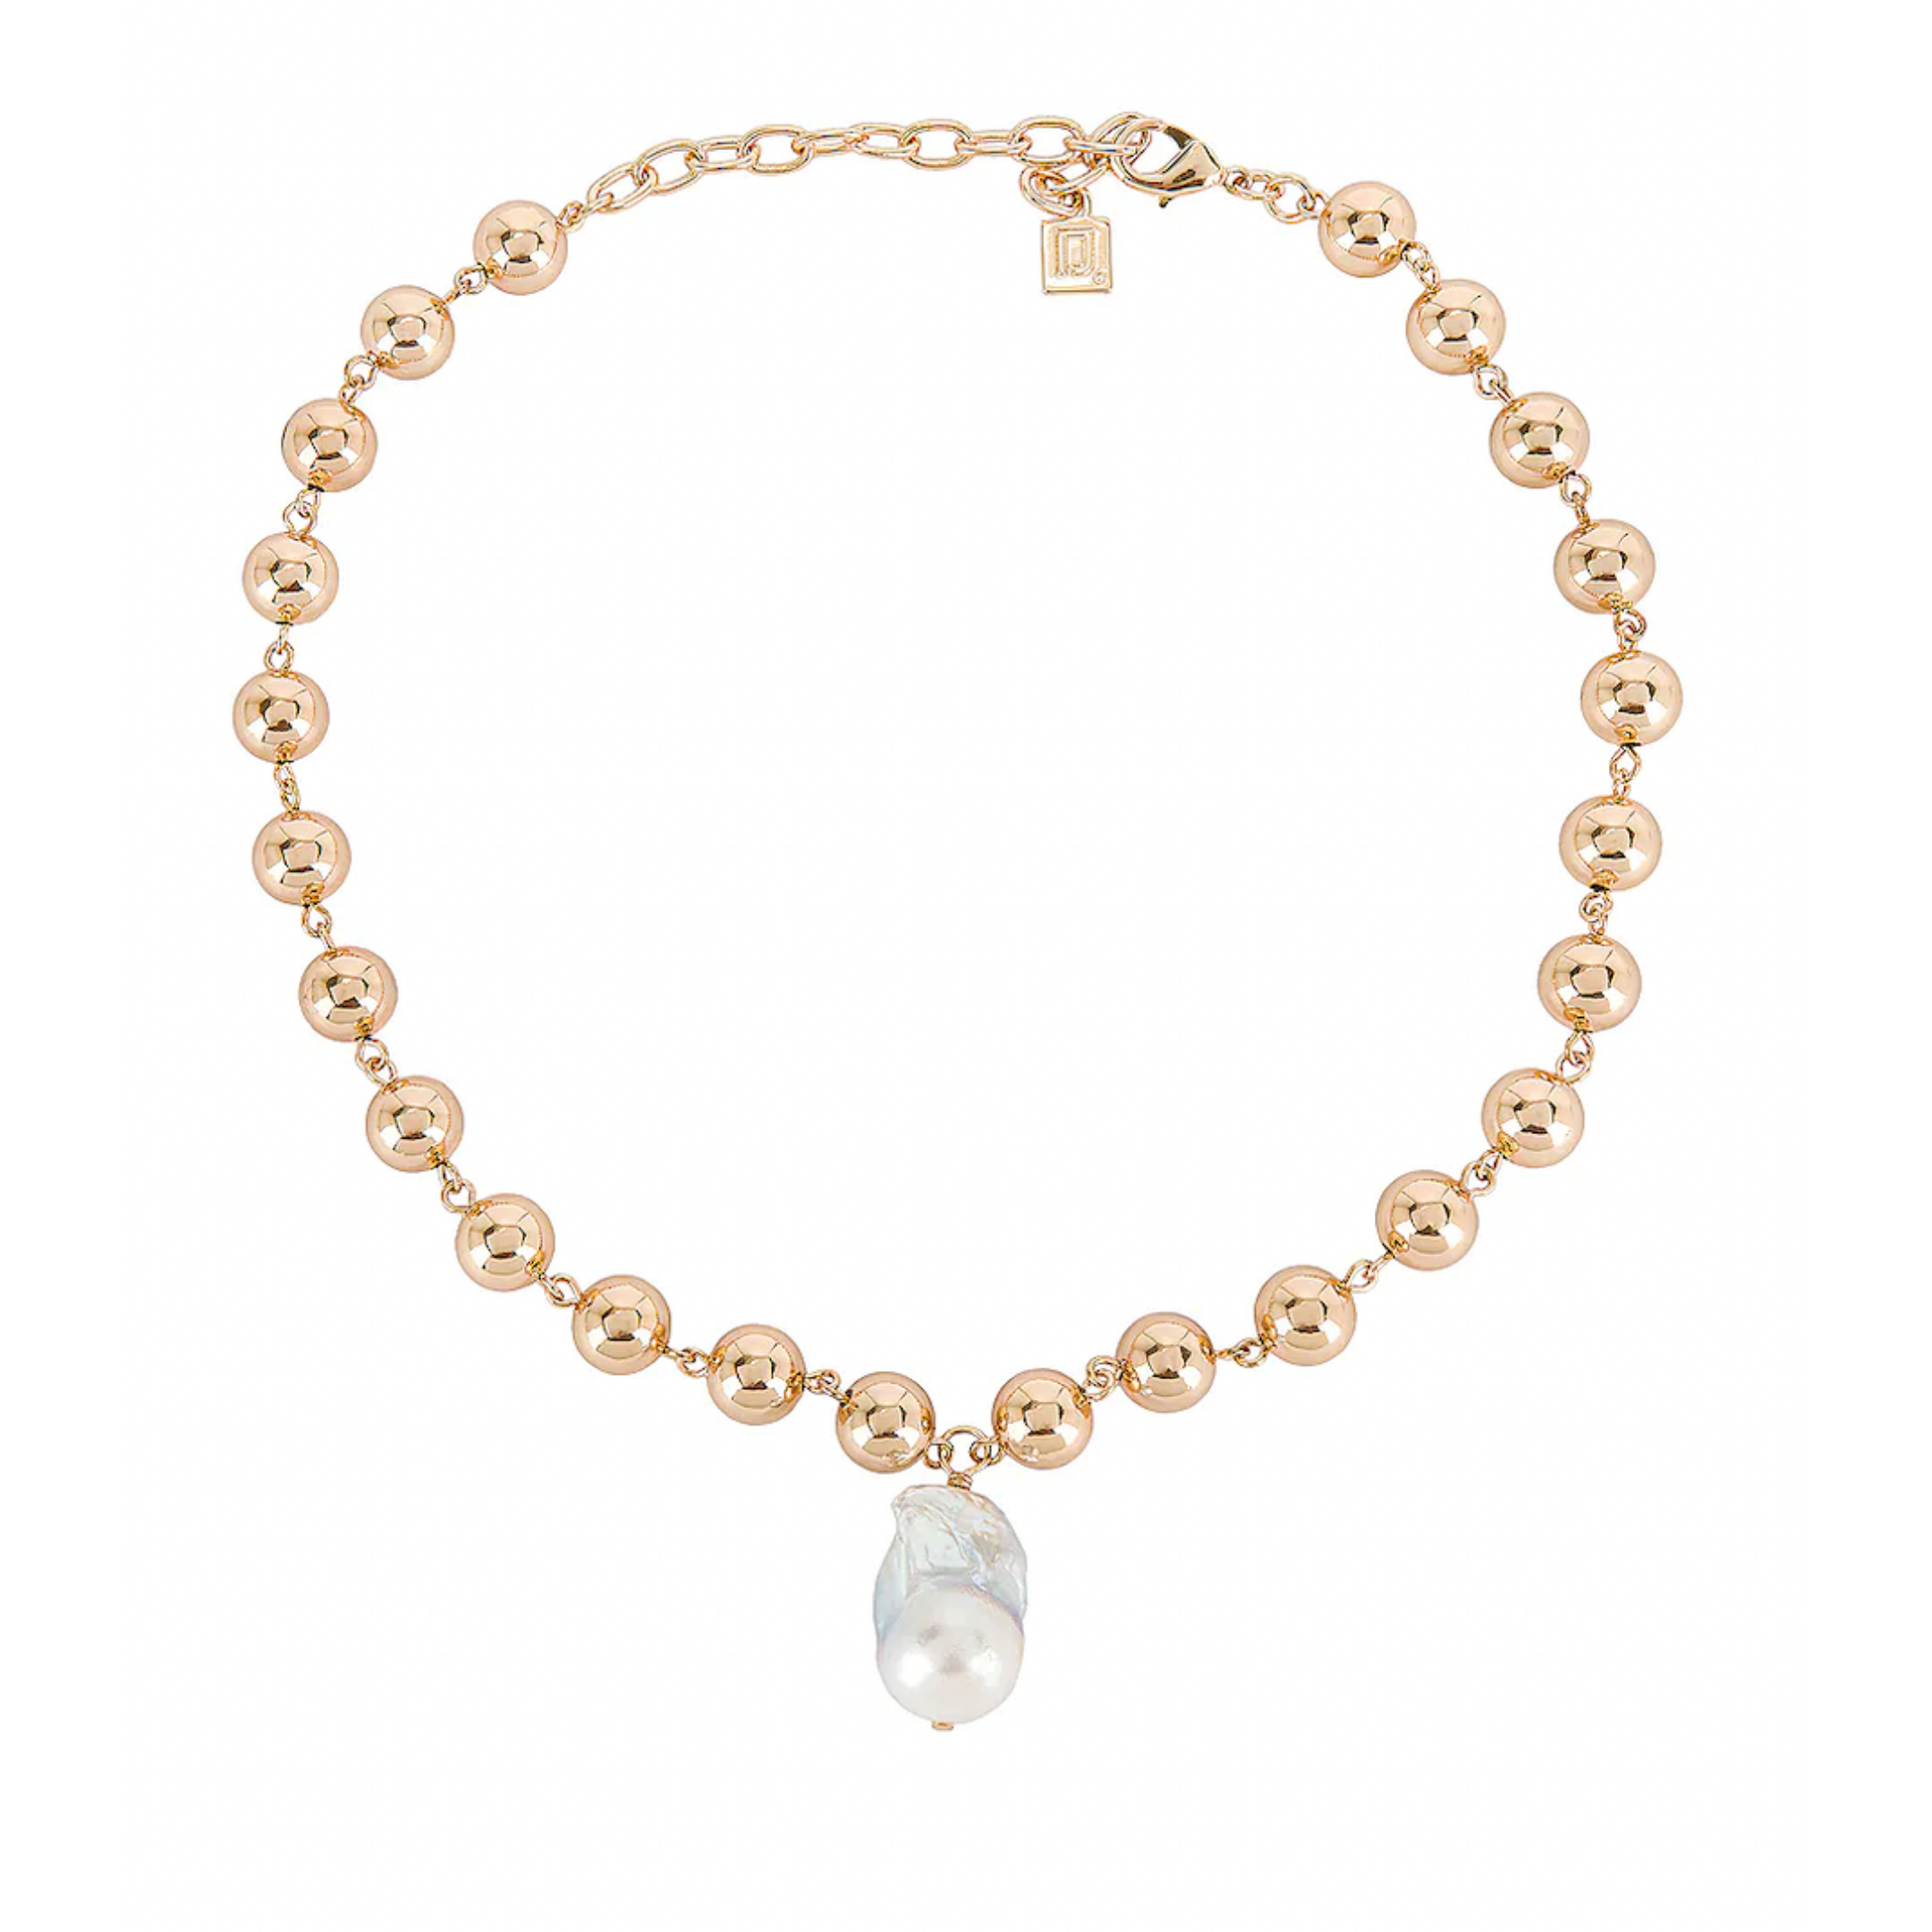 These Pearl Jewelry Pieces Are So Classic, Yet So Stylish | Essence